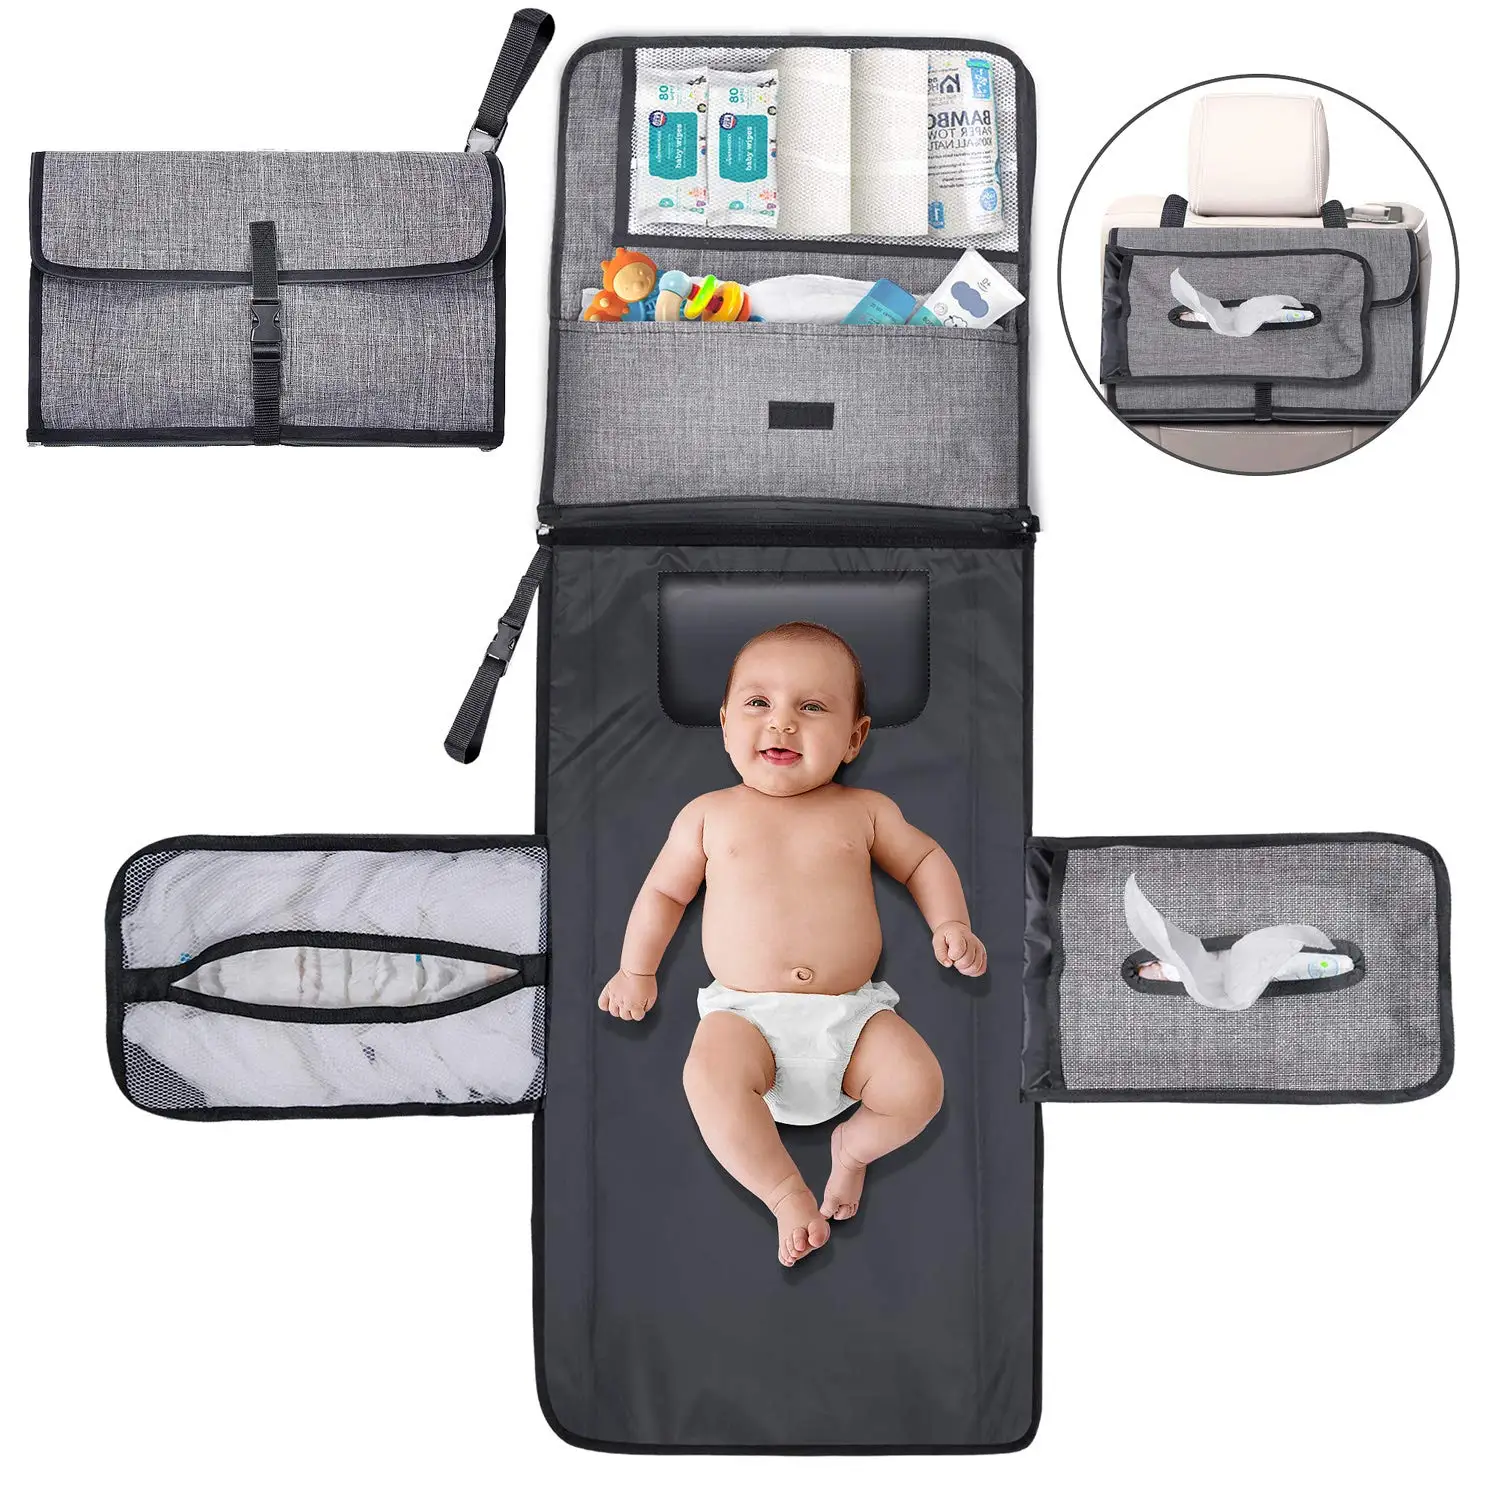 

Amazon Hot Sale High Quality Infant Portable Diaper Baby Changing Pad Cover, Black